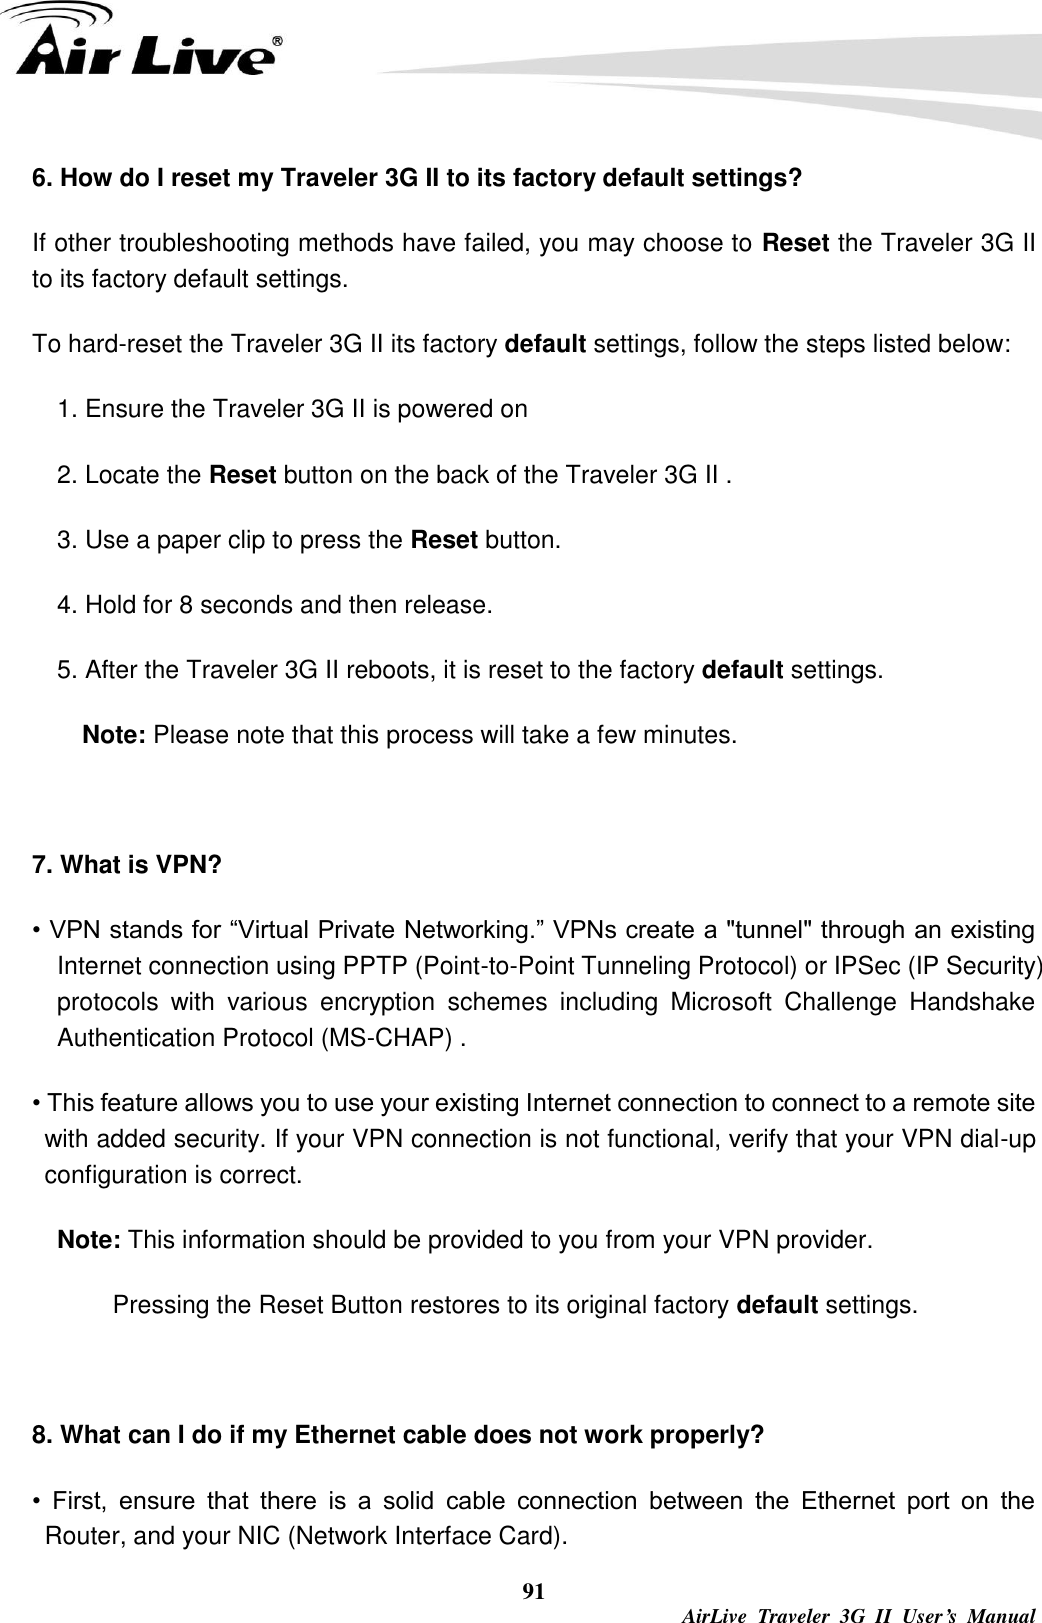   91  AirLive  Traveler  3G  II  User’s  Manual 6. How do I reset my Traveler 3G II to its factory default settings? If other troubleshooting methods have failed, you may choose to Reset the Traveler 3G II to its factory default settings. To hard-reset the Traveler 3G II its factory default settings, follow the steps listed below: 1. Ensure the Traveler 3G II is powered on 2. Locate the Reset button on the back of the Traveler 3G II . 3. Use a paper clip to press the Reset button. 4. Hold for 8 seconds and then release. 5. After the Traveler 3G II reboots, it is reset to the factory default settings. Note: Please note that this process will take a few minutes.  7. What is VPN? • VPN stands for “Virtual Private Networking.” VPNs create a &quot;tunnel&quot; through an existing Internet connection using PPTP (Point-to-Point Tunneling Protocol) or IPSec (IP Security) protocols  with  various  encryption  schemes  including  Microsoft  Challenge  Handshake Authentication Protocol (MS-CHAP) . • This feature allows you to use your existing Internet connection to connect to a remote site with added security. If your VPN connection is not functional, verify that your VPN dial-up configuration is correct. Note: This information should be provided to you from your VPN provider. Pressing the Reset Button restores to its original factory default settings.  8. What can I do if my Ethernet cable does not work properly? •  First,  ensure  that  there  is  a  solid  cable  connection  between  the  Ethernet  port  on  the Router, and your NIC (Network Interface Card). 